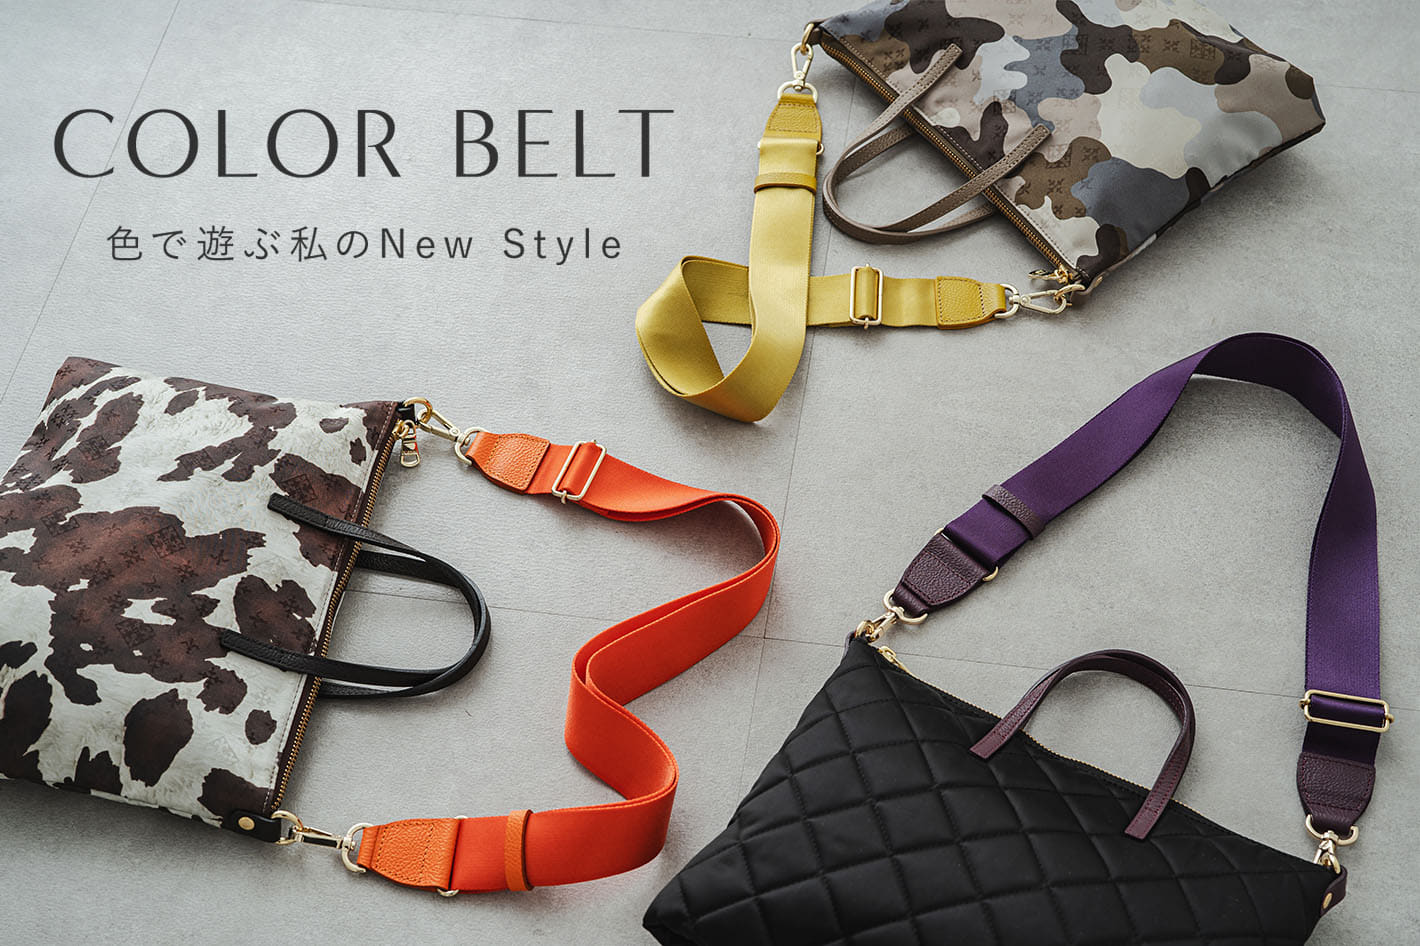 russet COLOR BELT -色で遊ぶ私のNew Style-